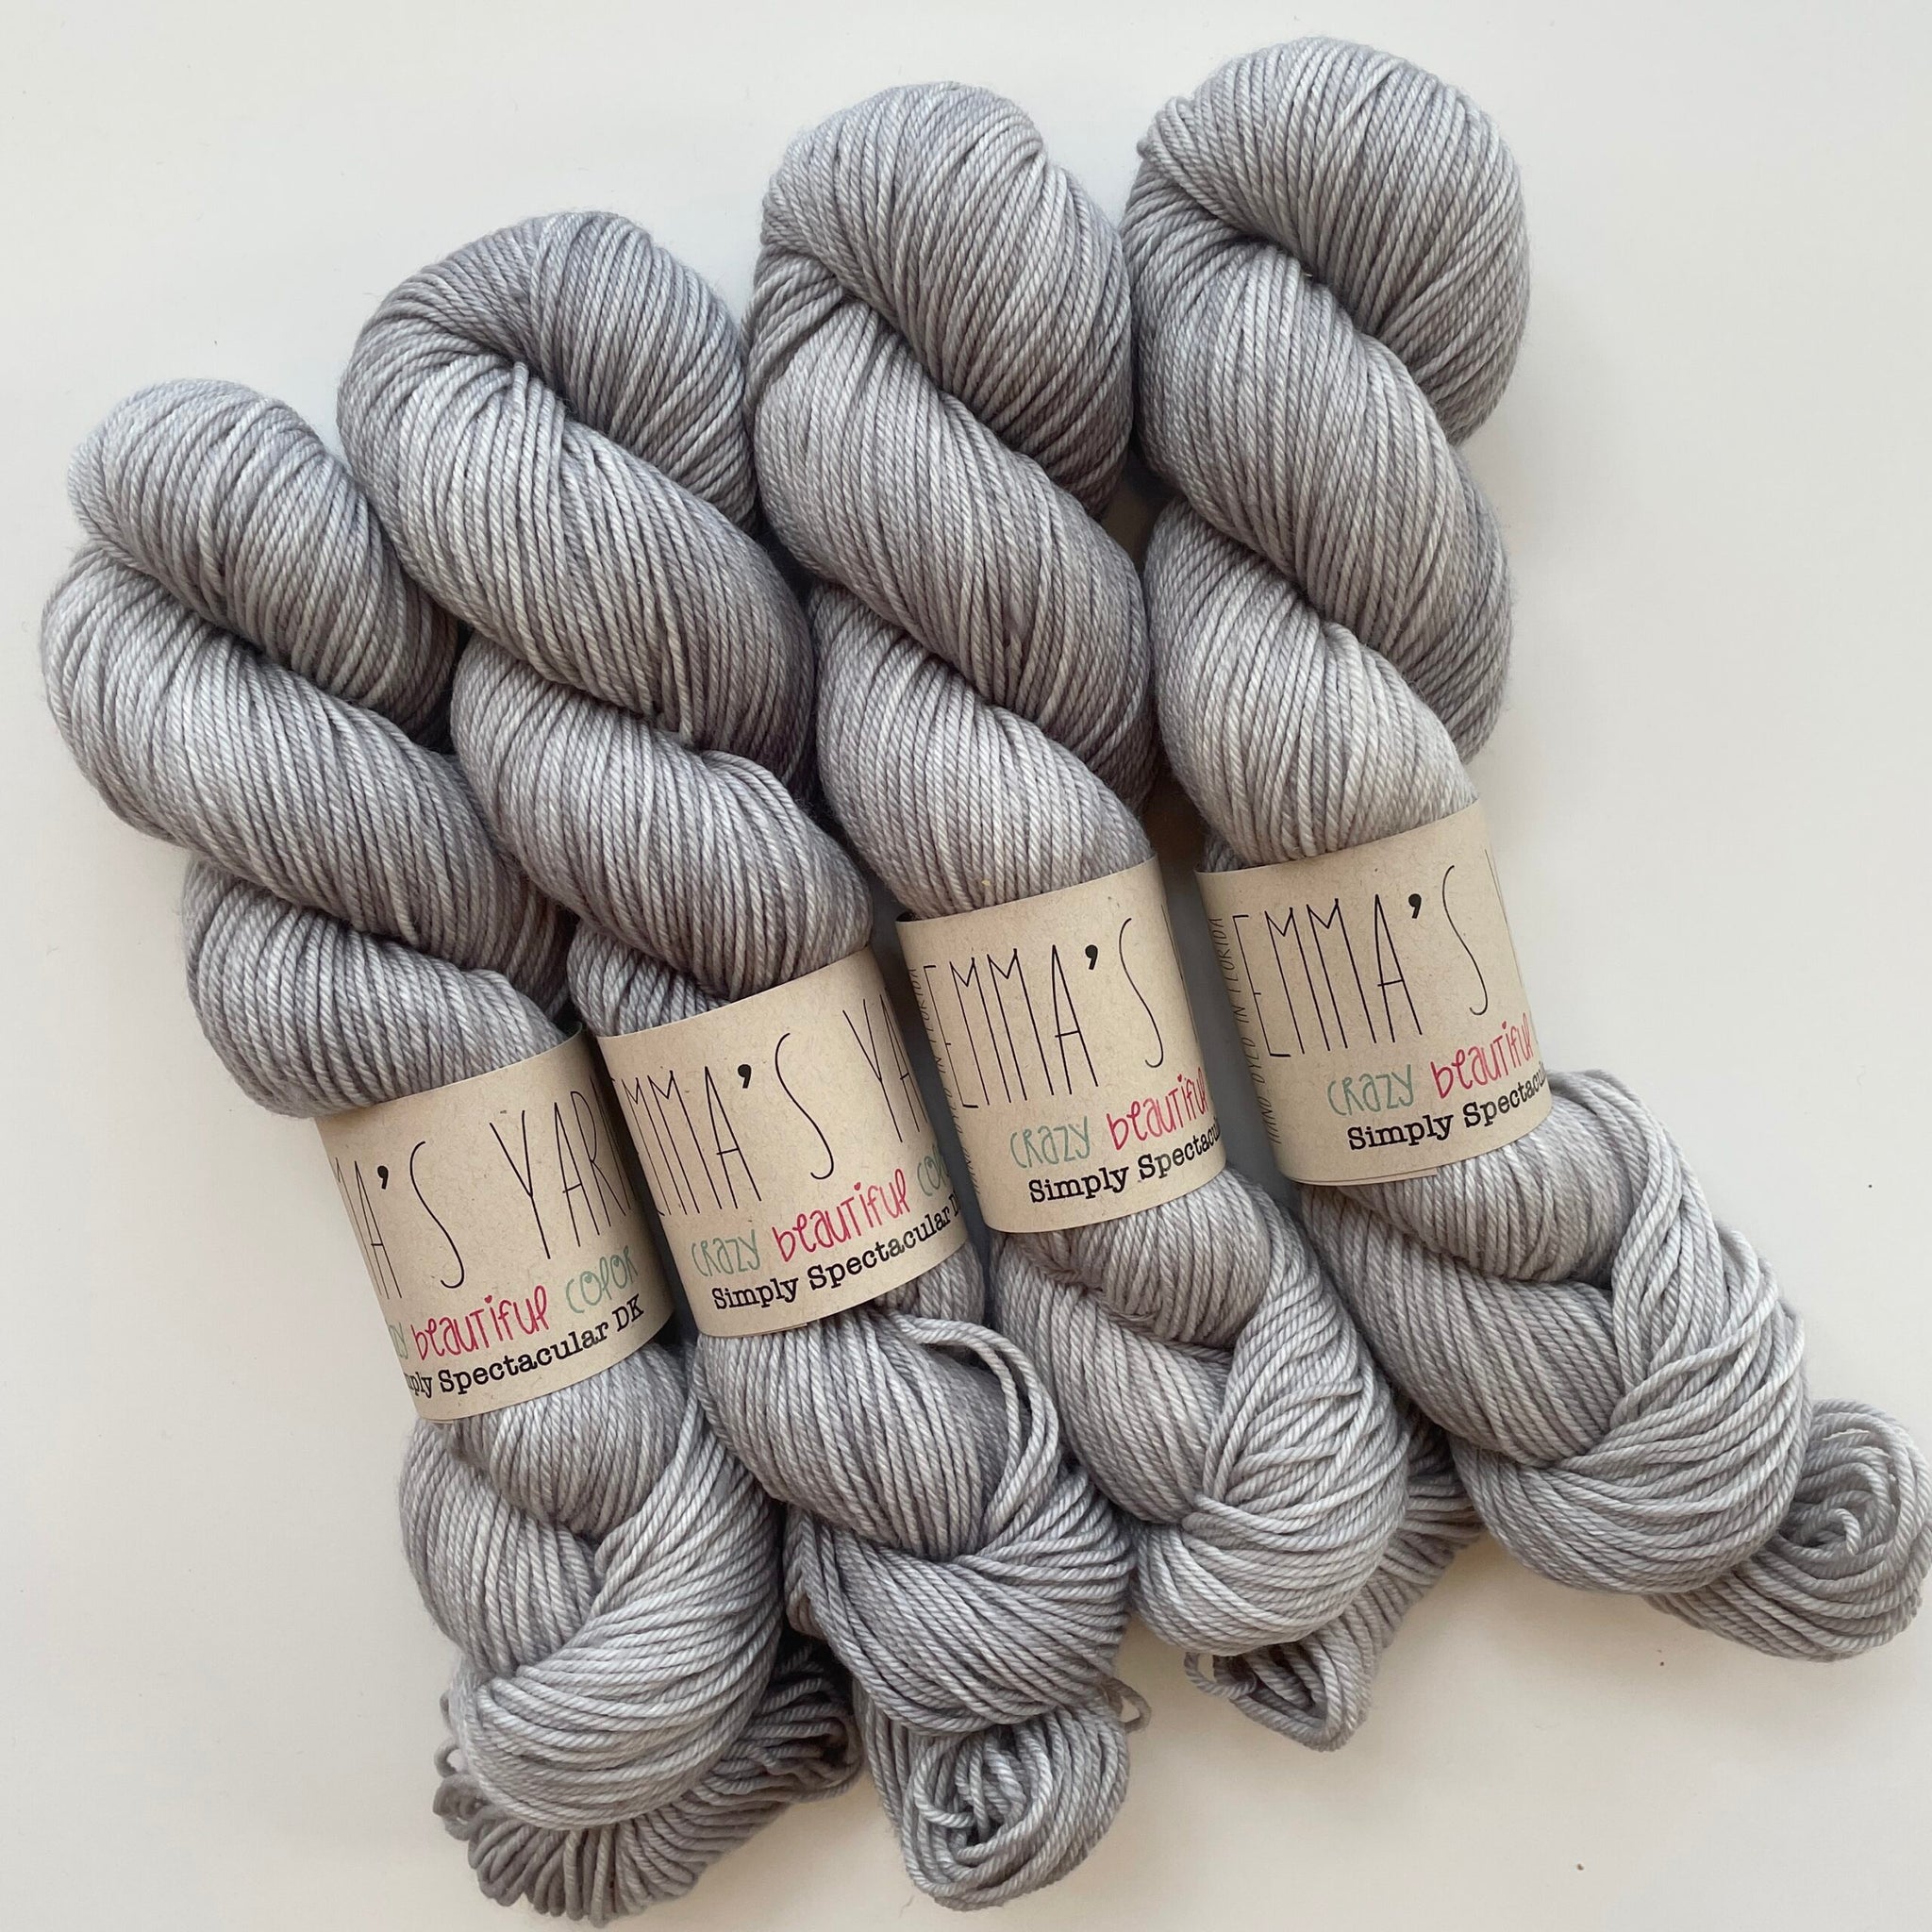 Silver Lining - Simply Spectacular DK (6)